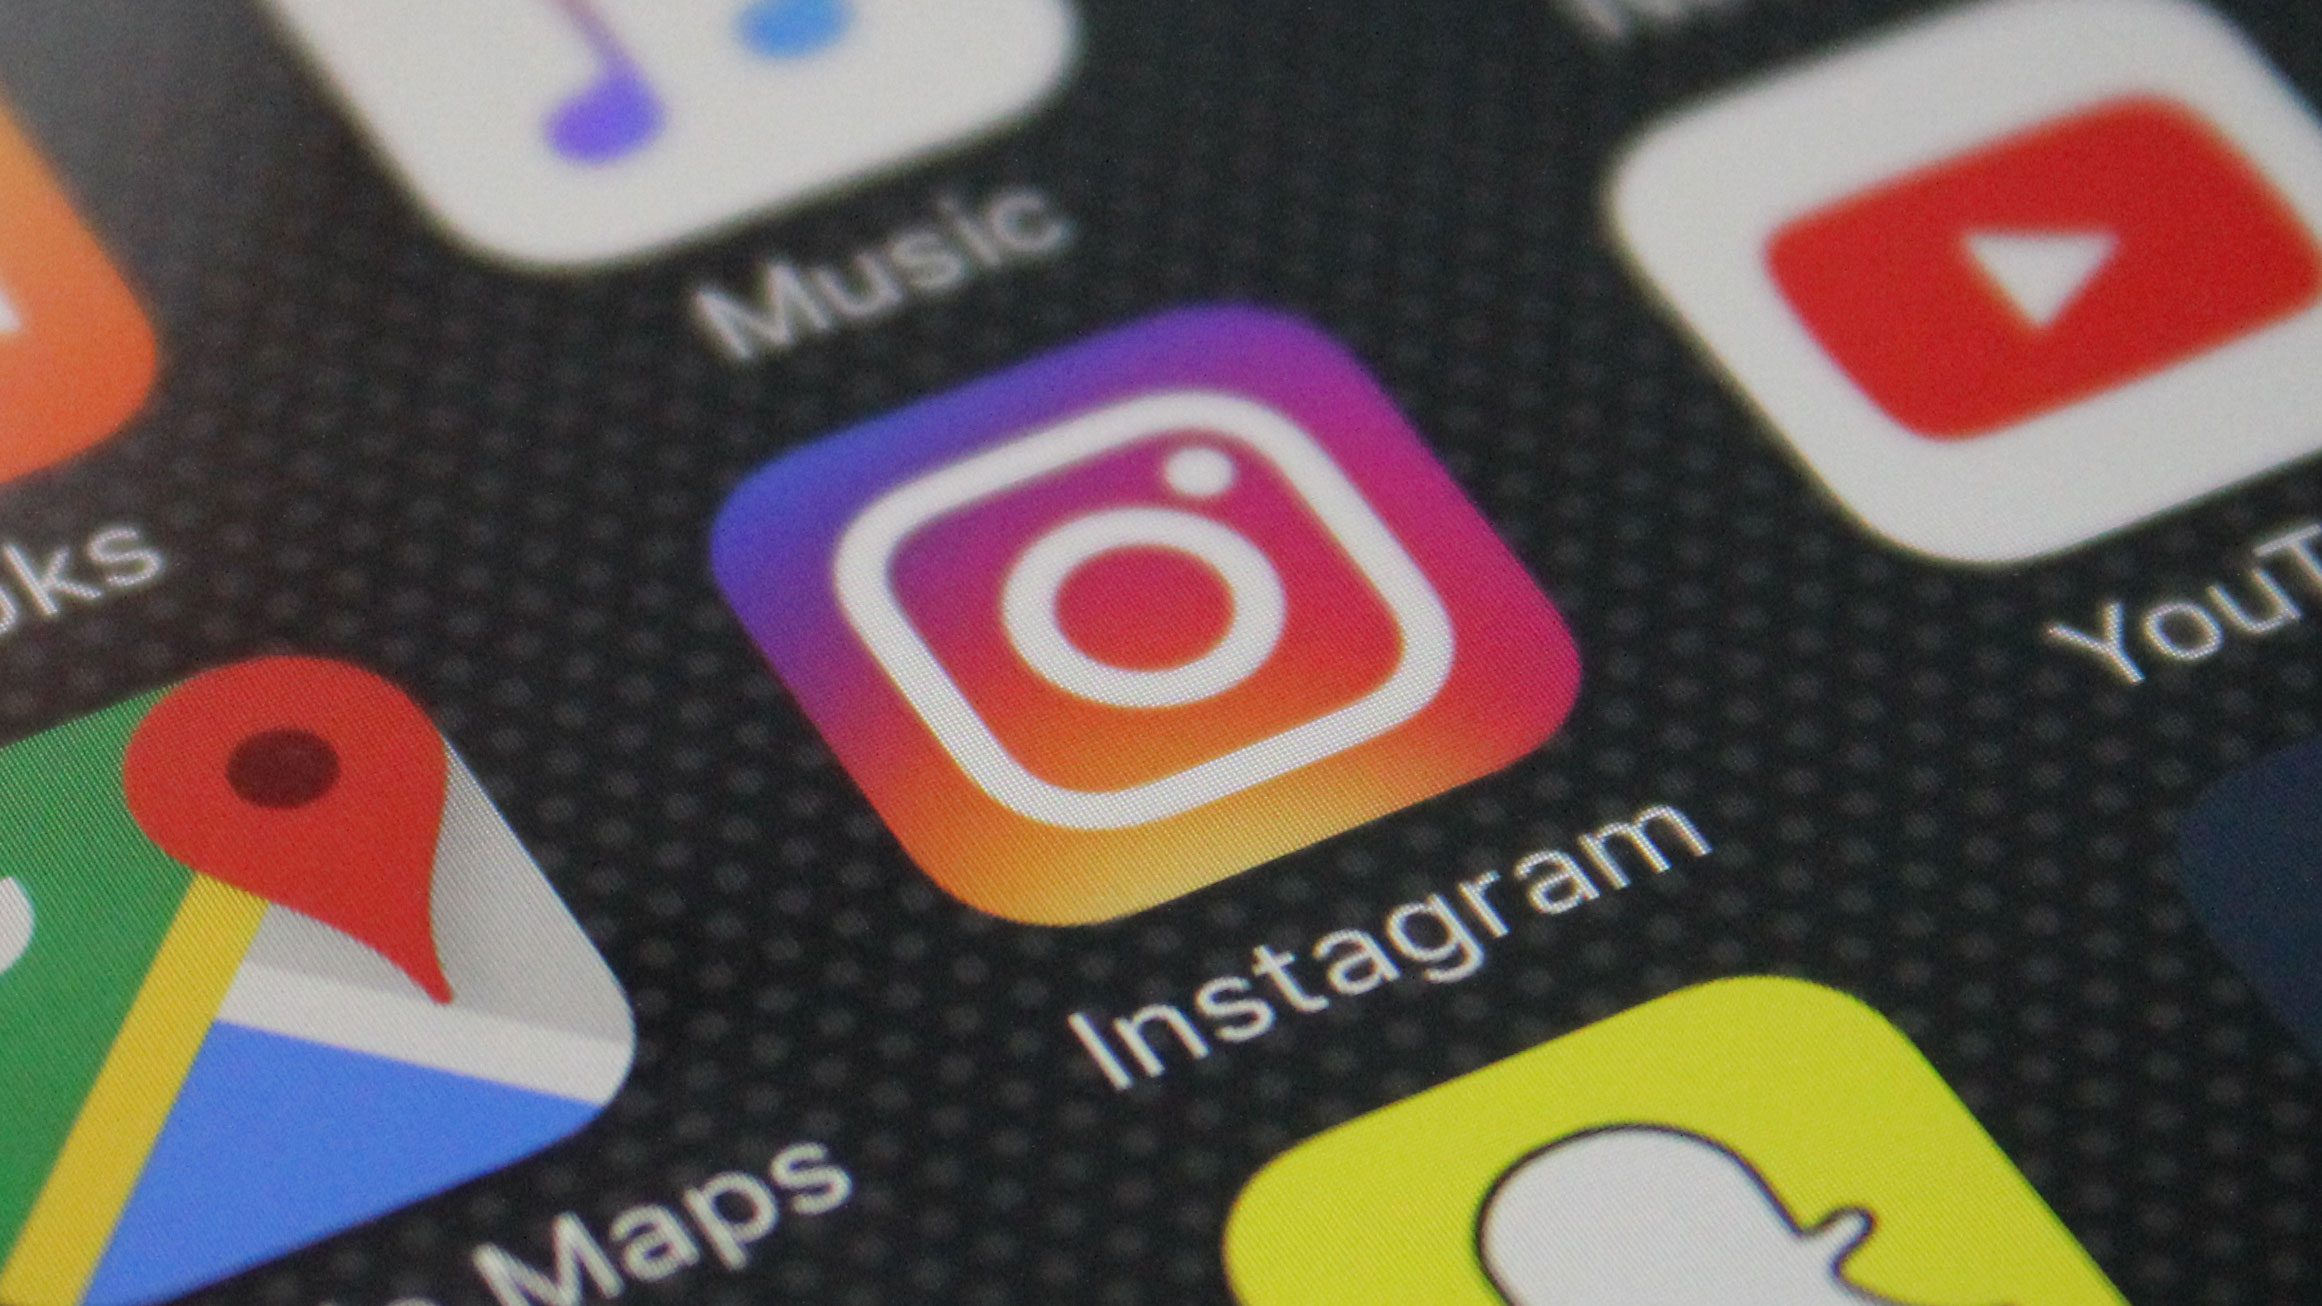 How to Make Money on Instagram in 2019